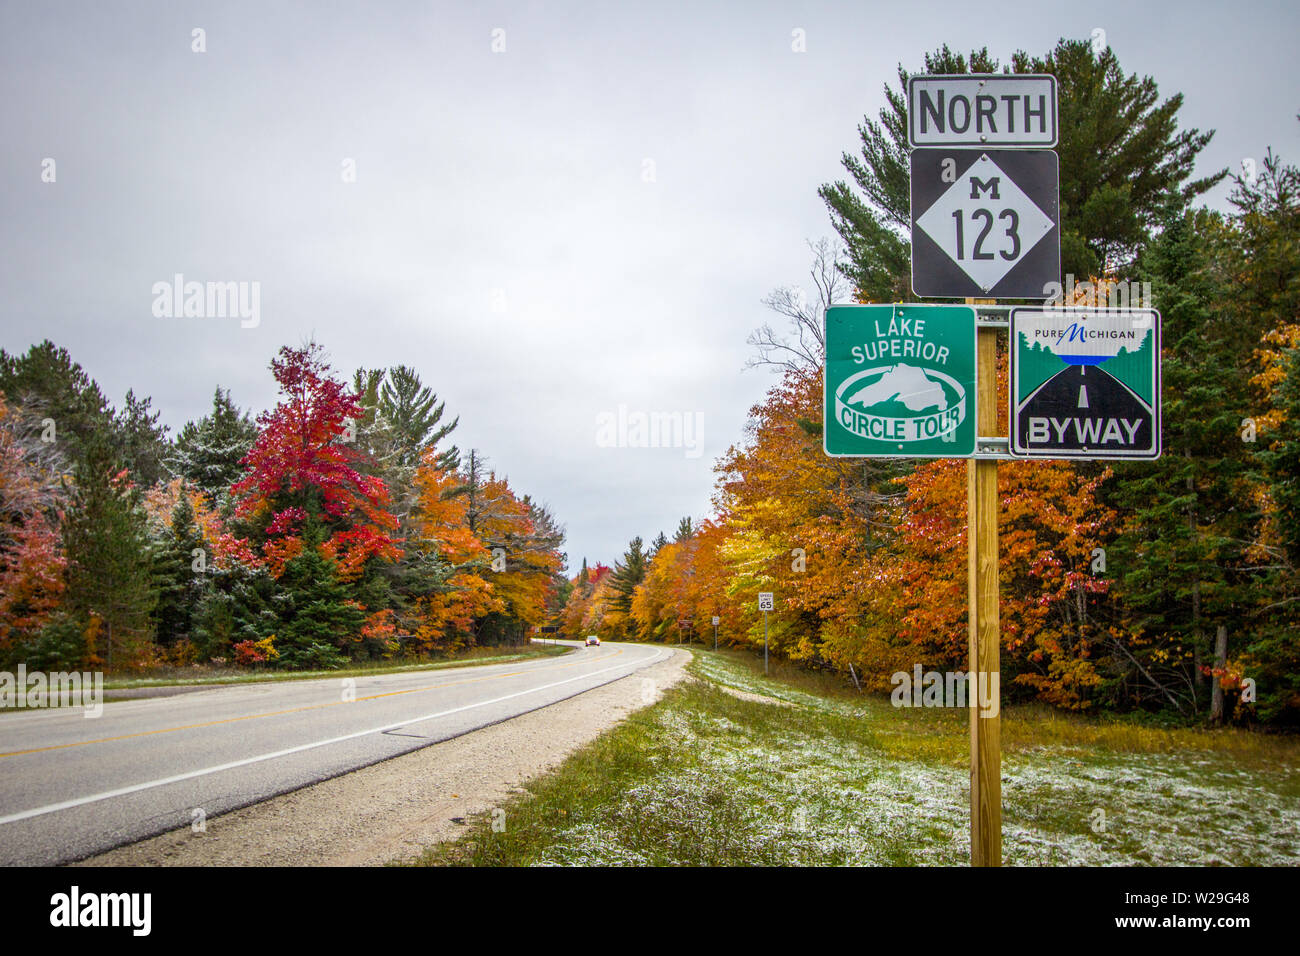 Paradise, Michigan, USA - October 13, 2018: Michigan Scenic Byway with Lake Superior scenic circle tour sign on a rural Michigan two lane highway. Stock Photo